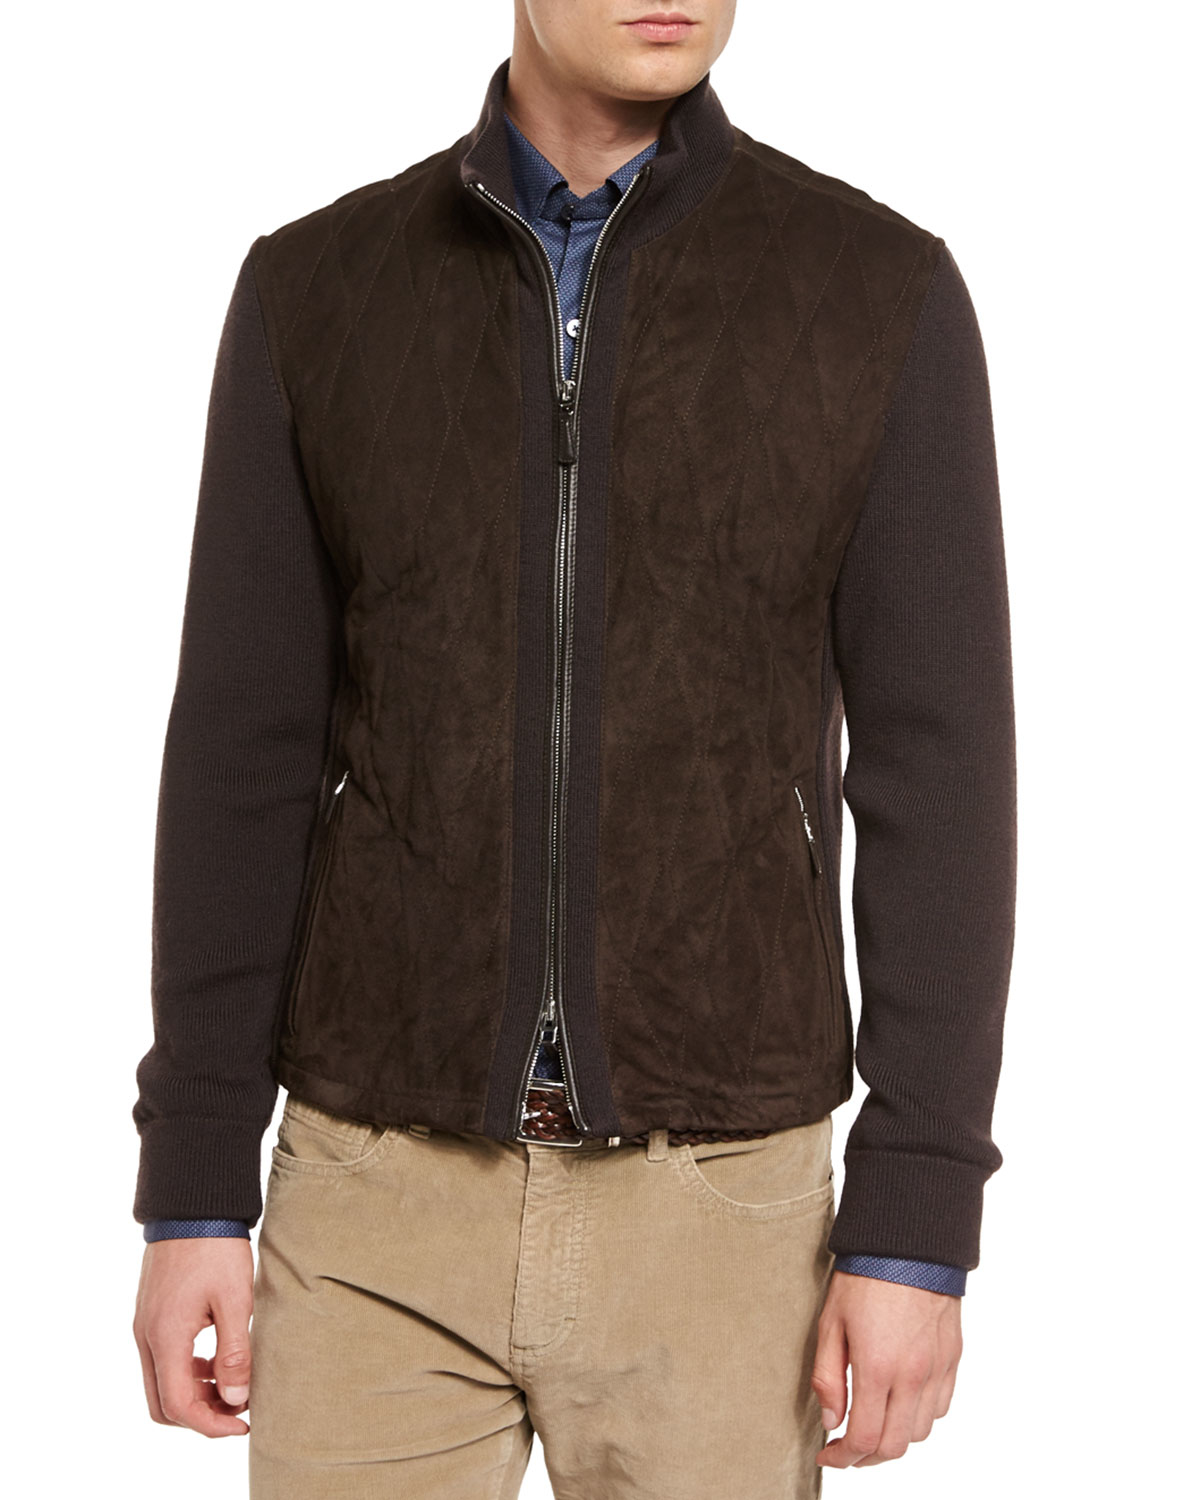 Lyst - Ermenegildo Zegna Quilted Suede Jacket With Knit Sleeves in ...